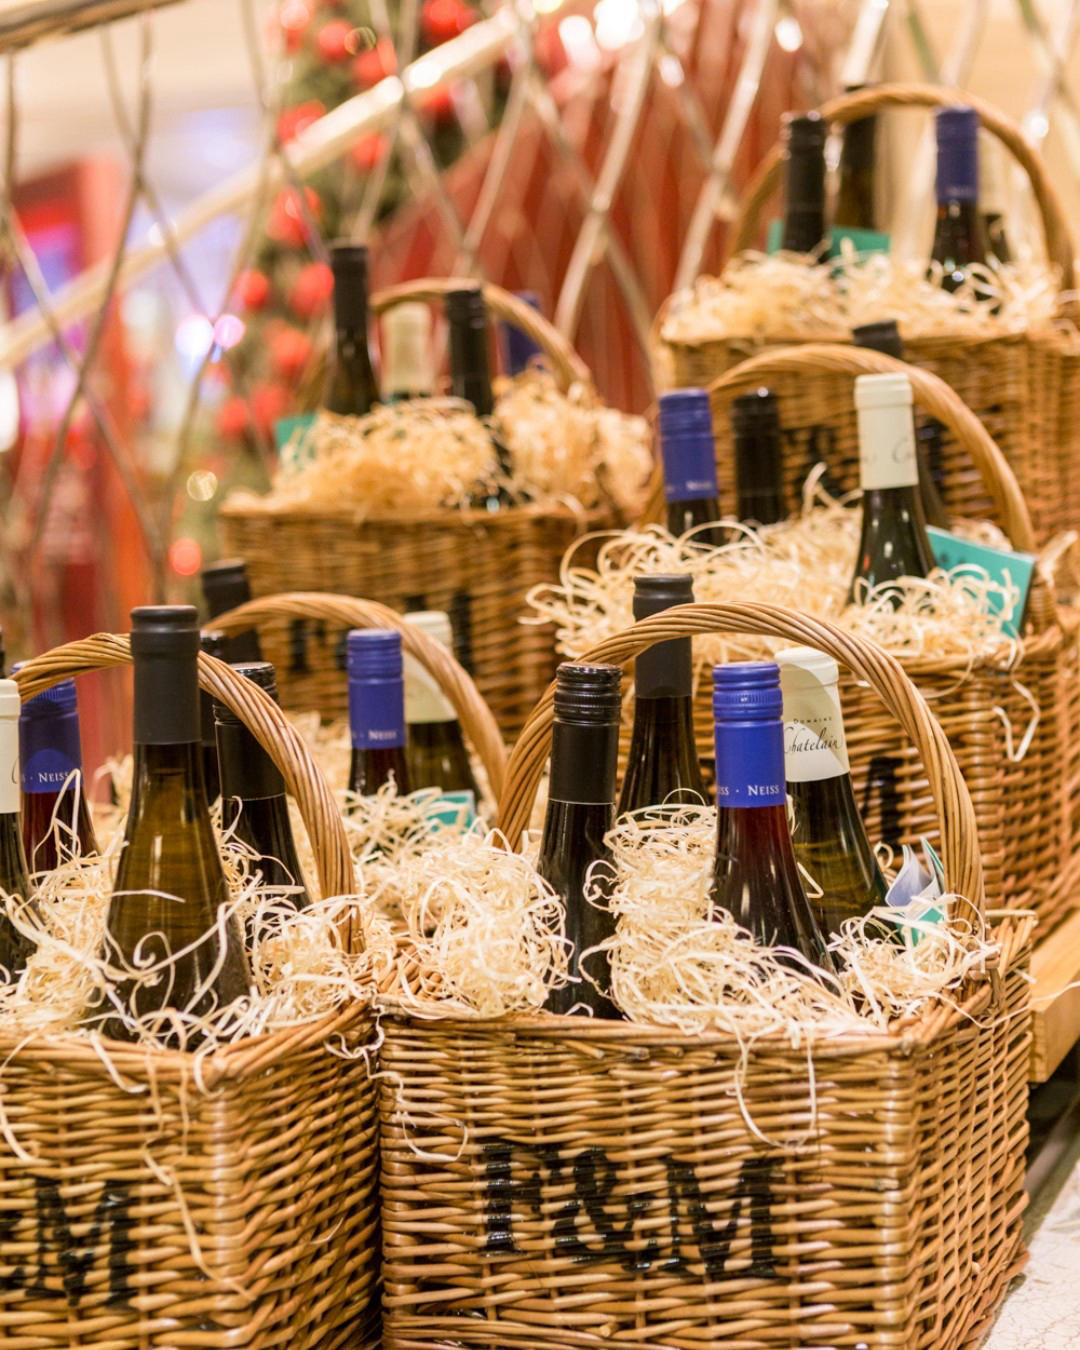 image  1 Fortnum & Mason - The only thing better than one wonderful bottle of wine is a wicker containing fou